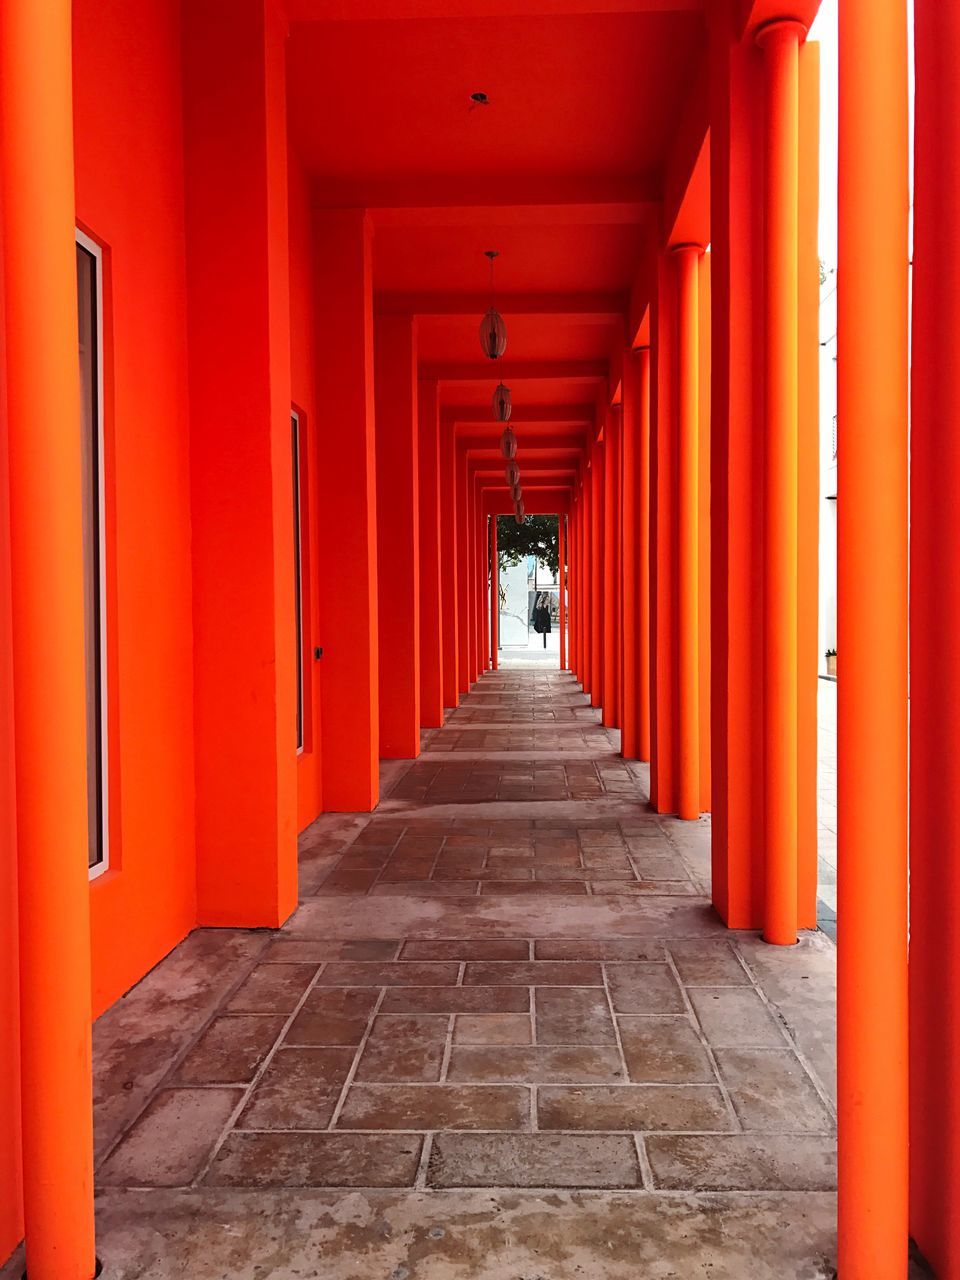 corridor, the way forward, red, architectural column, architecture, built structure, religion, travel destinations, place of worship, no people, spirituality, indoors, day, ancient history